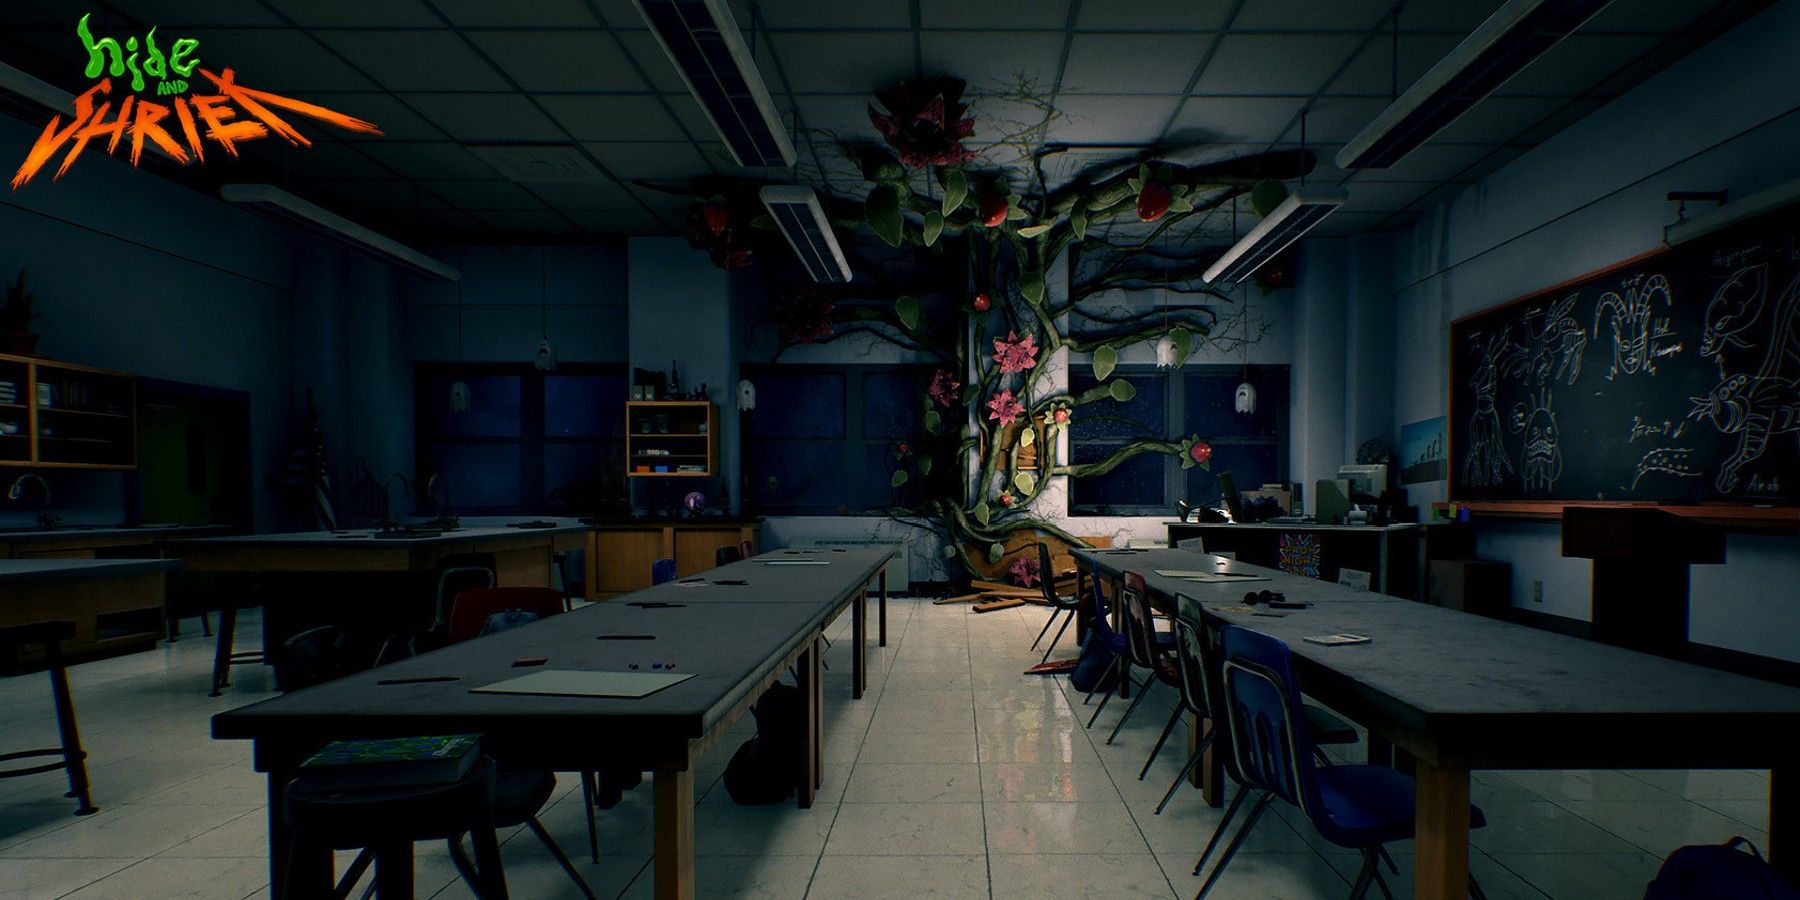 Hide and Shriek title and dark classroom with monstrous plant growth